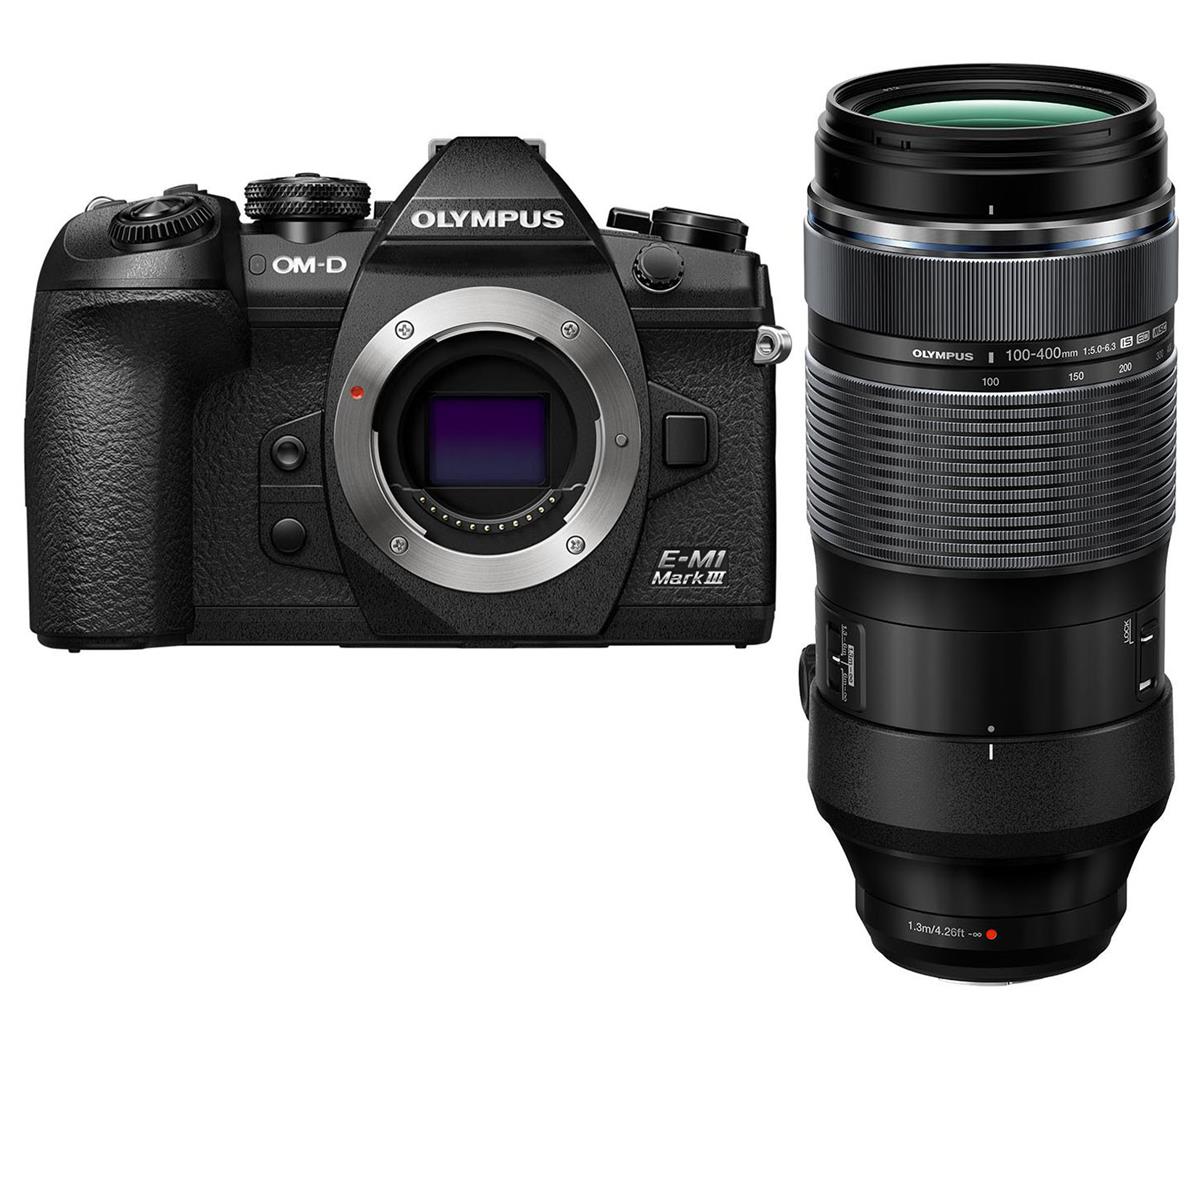 Image of Olympus OM-D E-M1 Mark III Mirrorless Camera Black with 100-400mm Lens